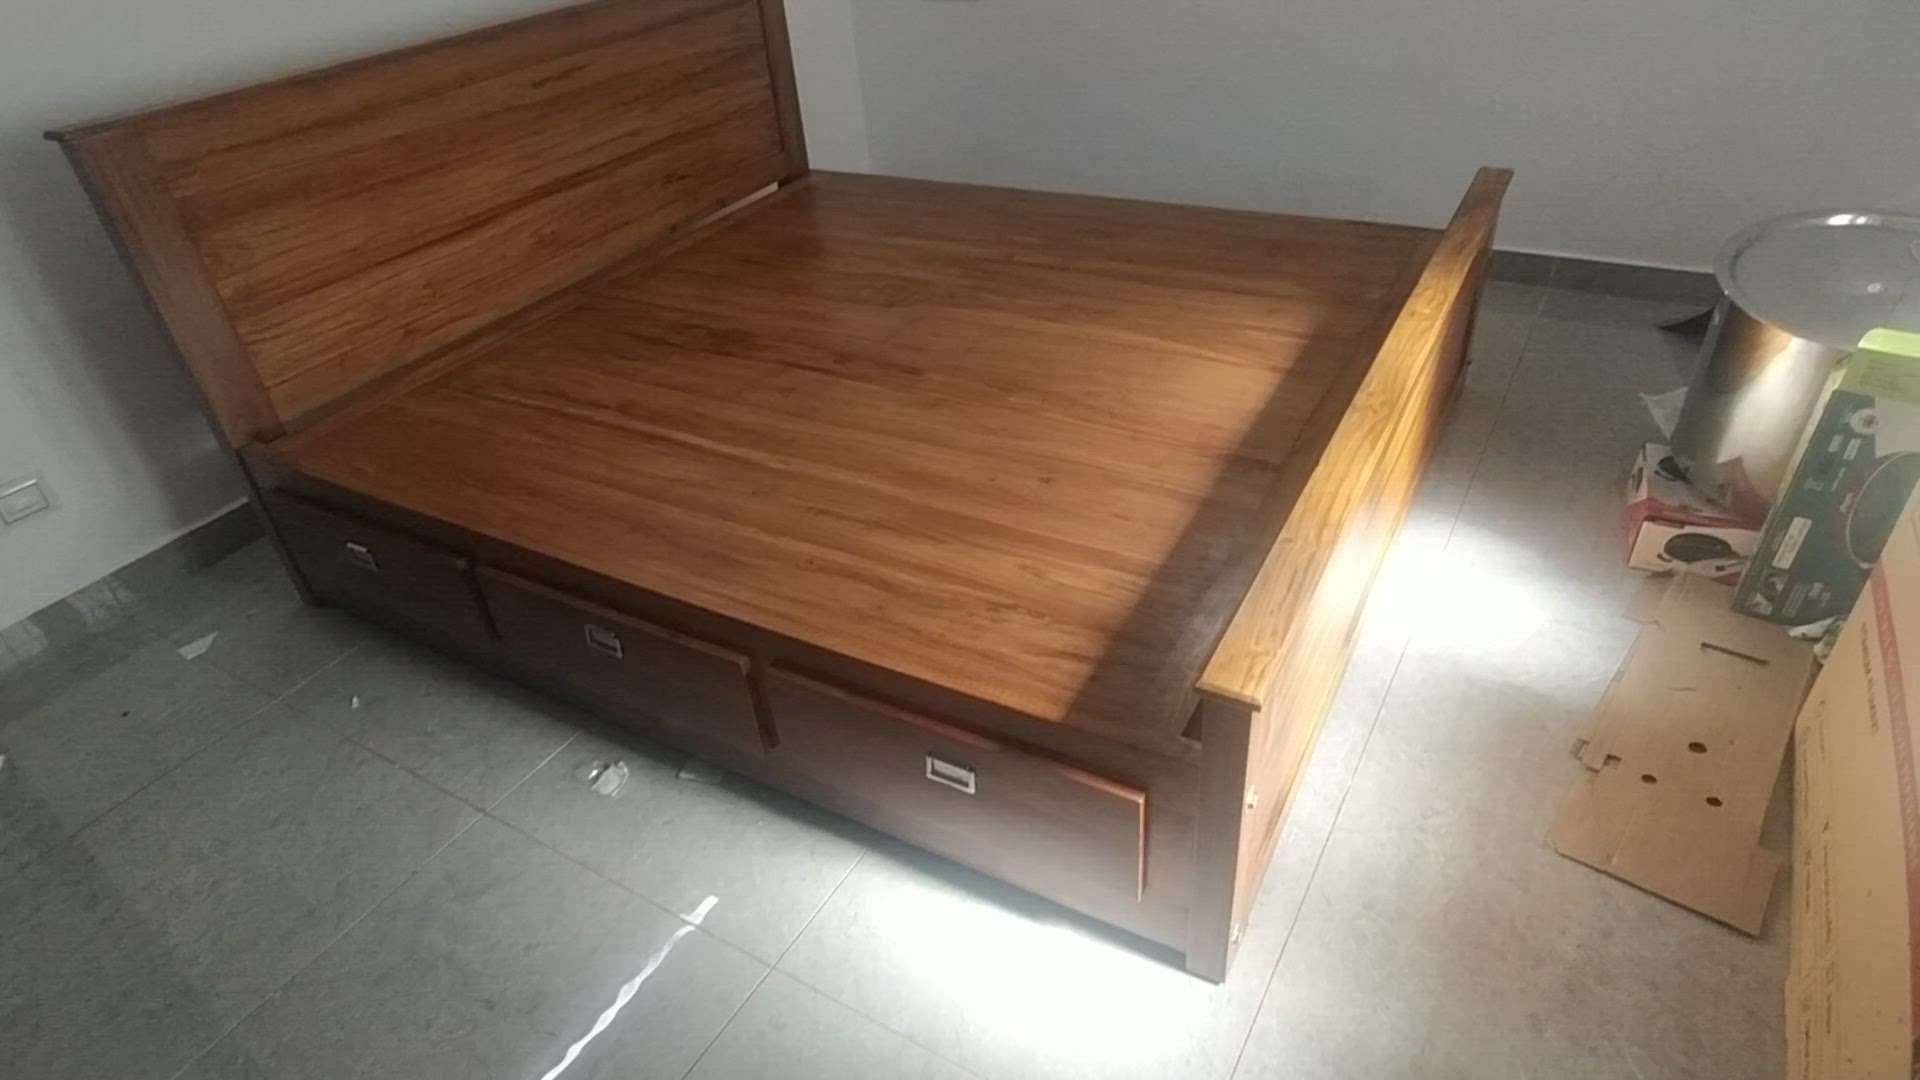 TEAK WOOD KING SIZE STORAGE BED WITH DRAWERS & DINING TABLE SET #table
 #Beds  #cot  #